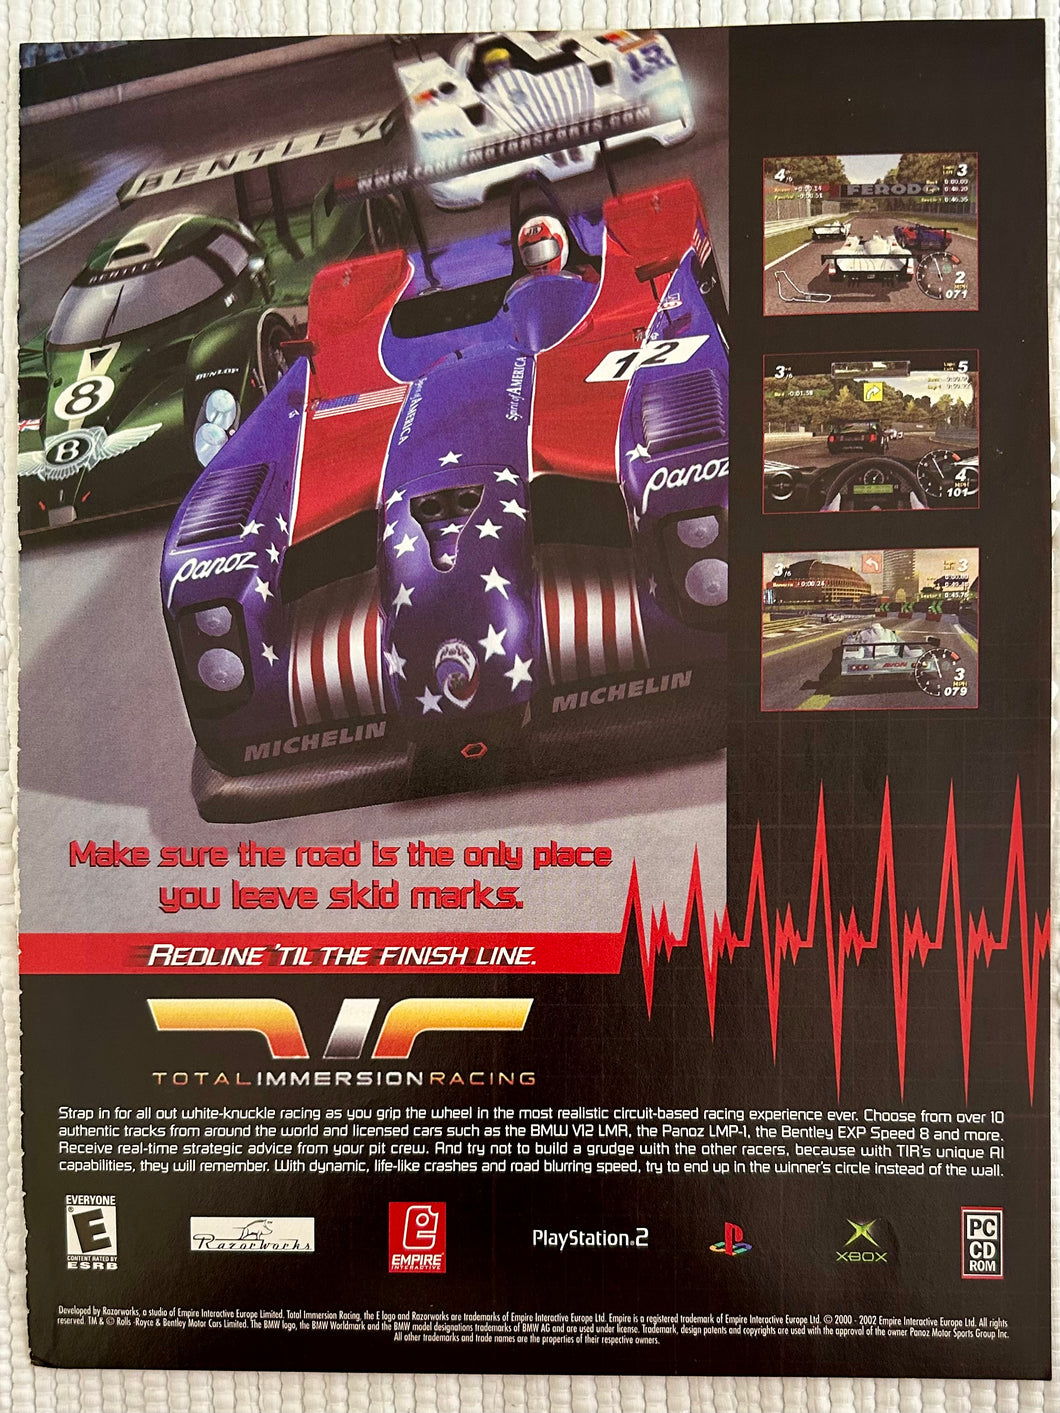 Total Immersion Racing - PS2  Xbox PC - Original Vintage Advertisement - Print Ads - Laminated A4 Poster